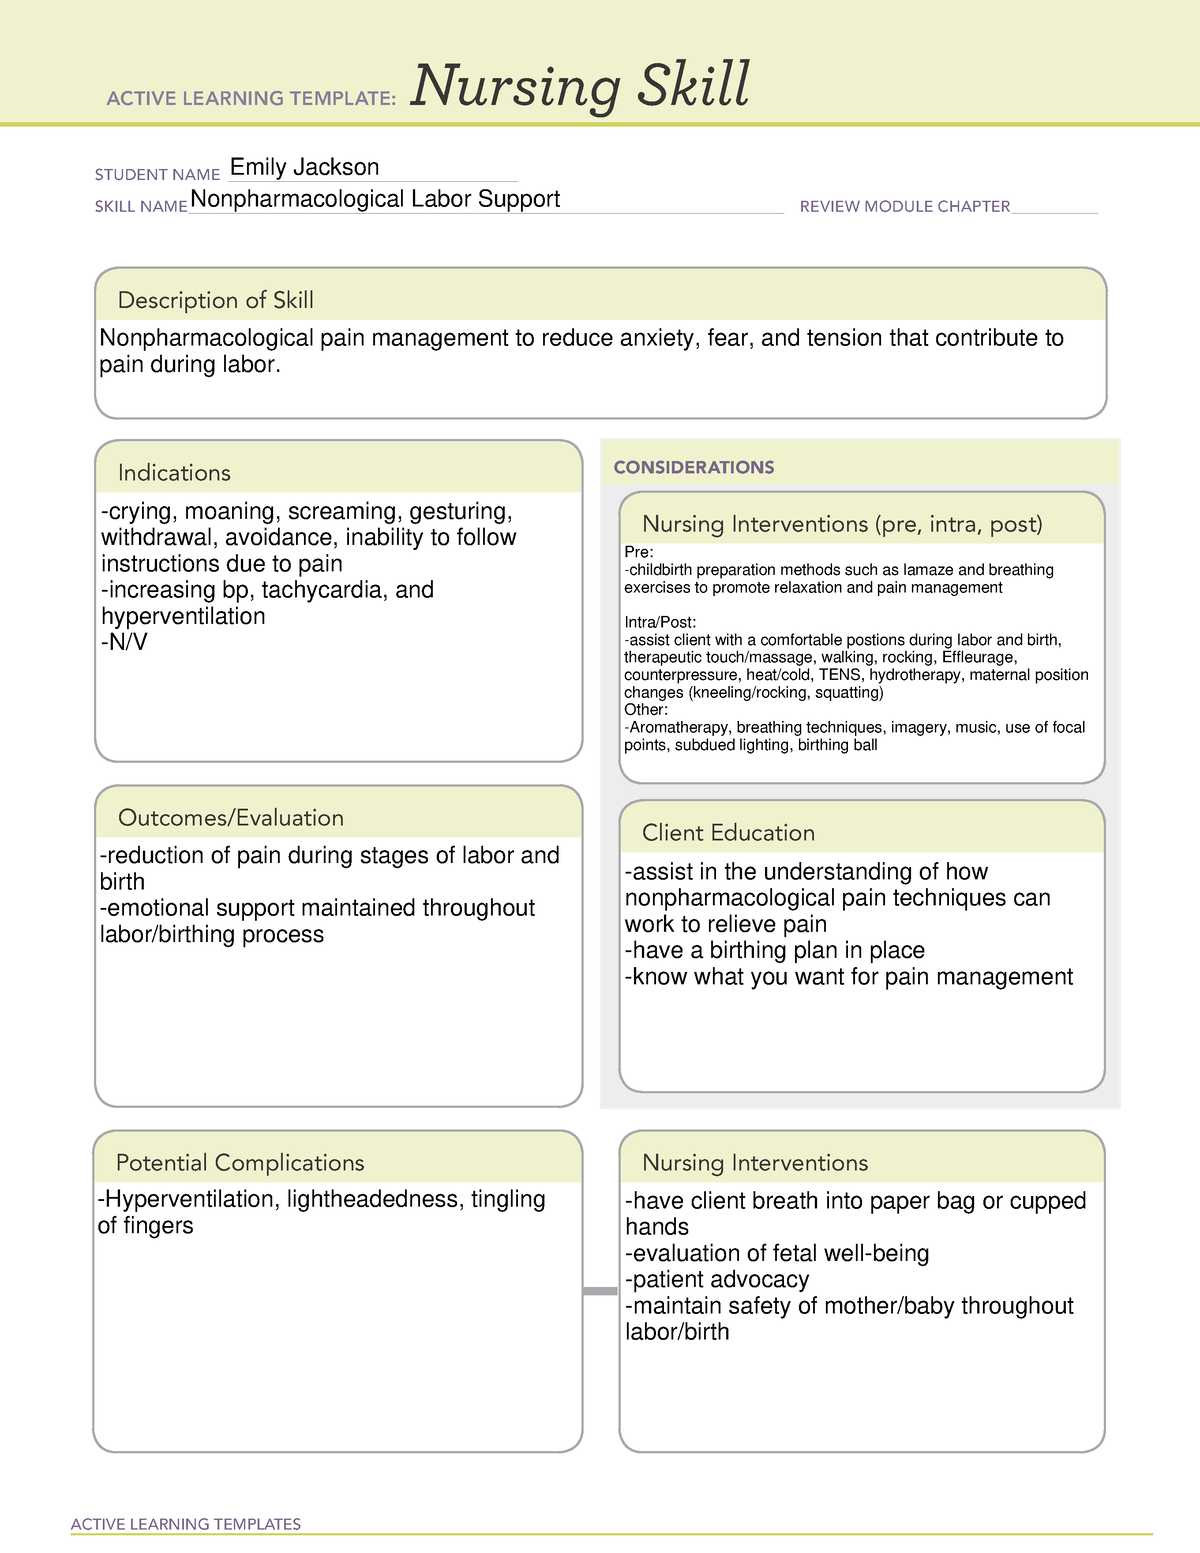 Active Learning Template Nursing Skill-1 - ACTIVE LEARNING TEMPLATES ...